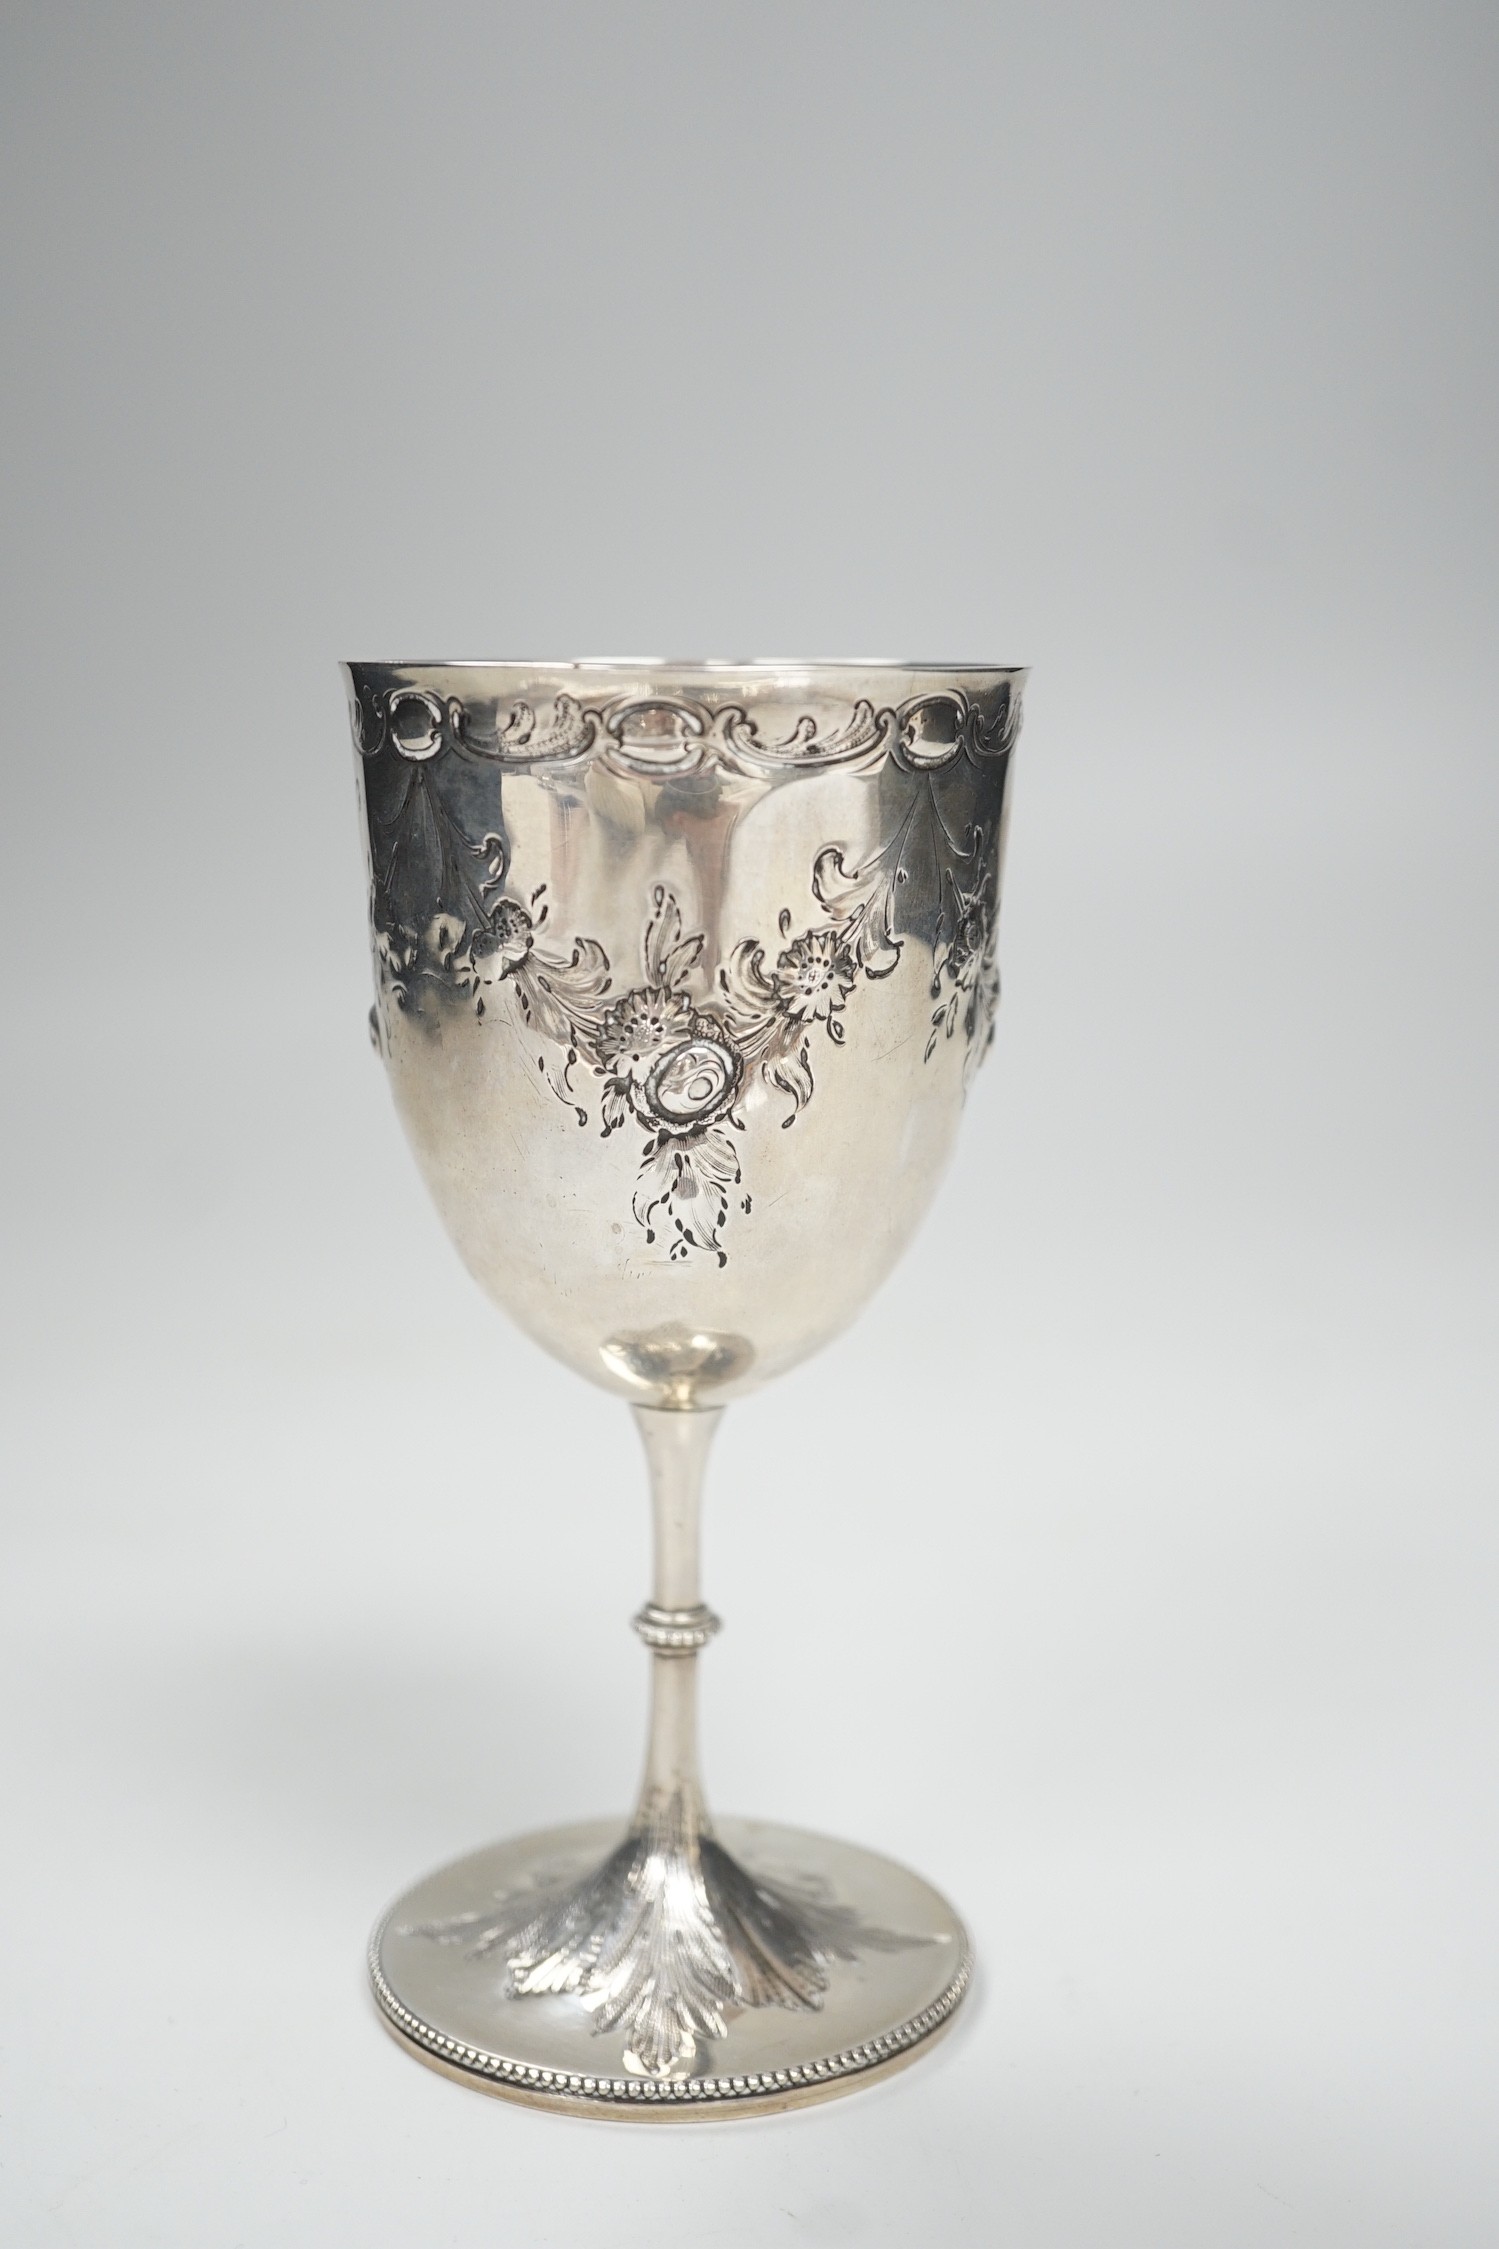 A Victorian embossed silver goblet by Charles Stuart Harris, London, 1875, 14.2cm, 3.3oz.